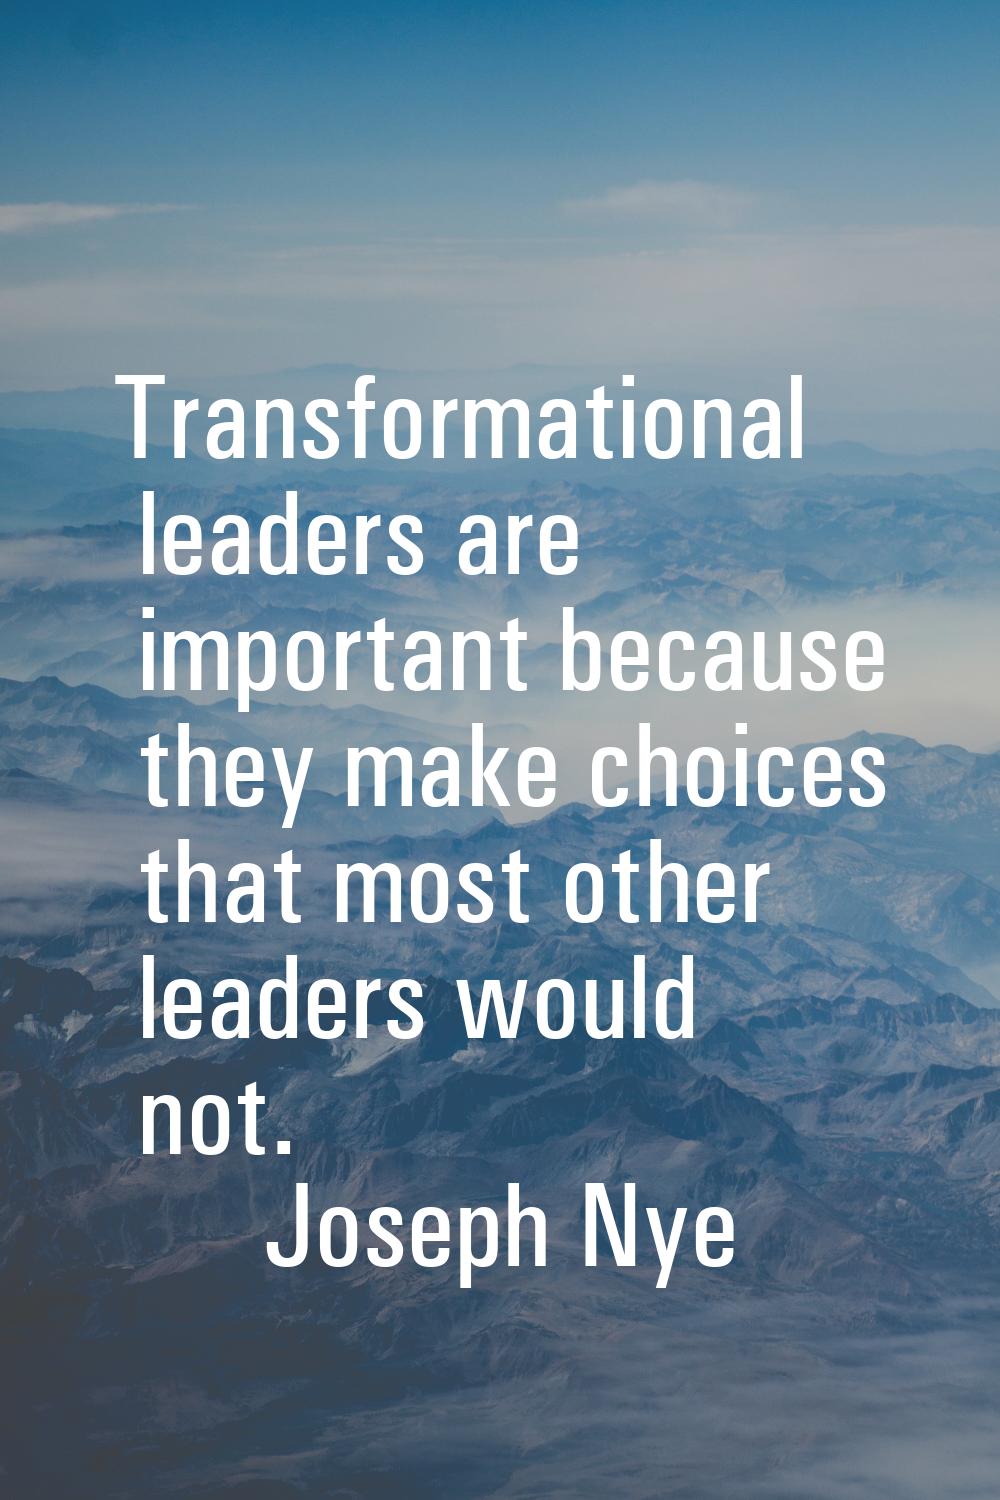 Transformational leaders are important because they make choices that most other leaders would not.